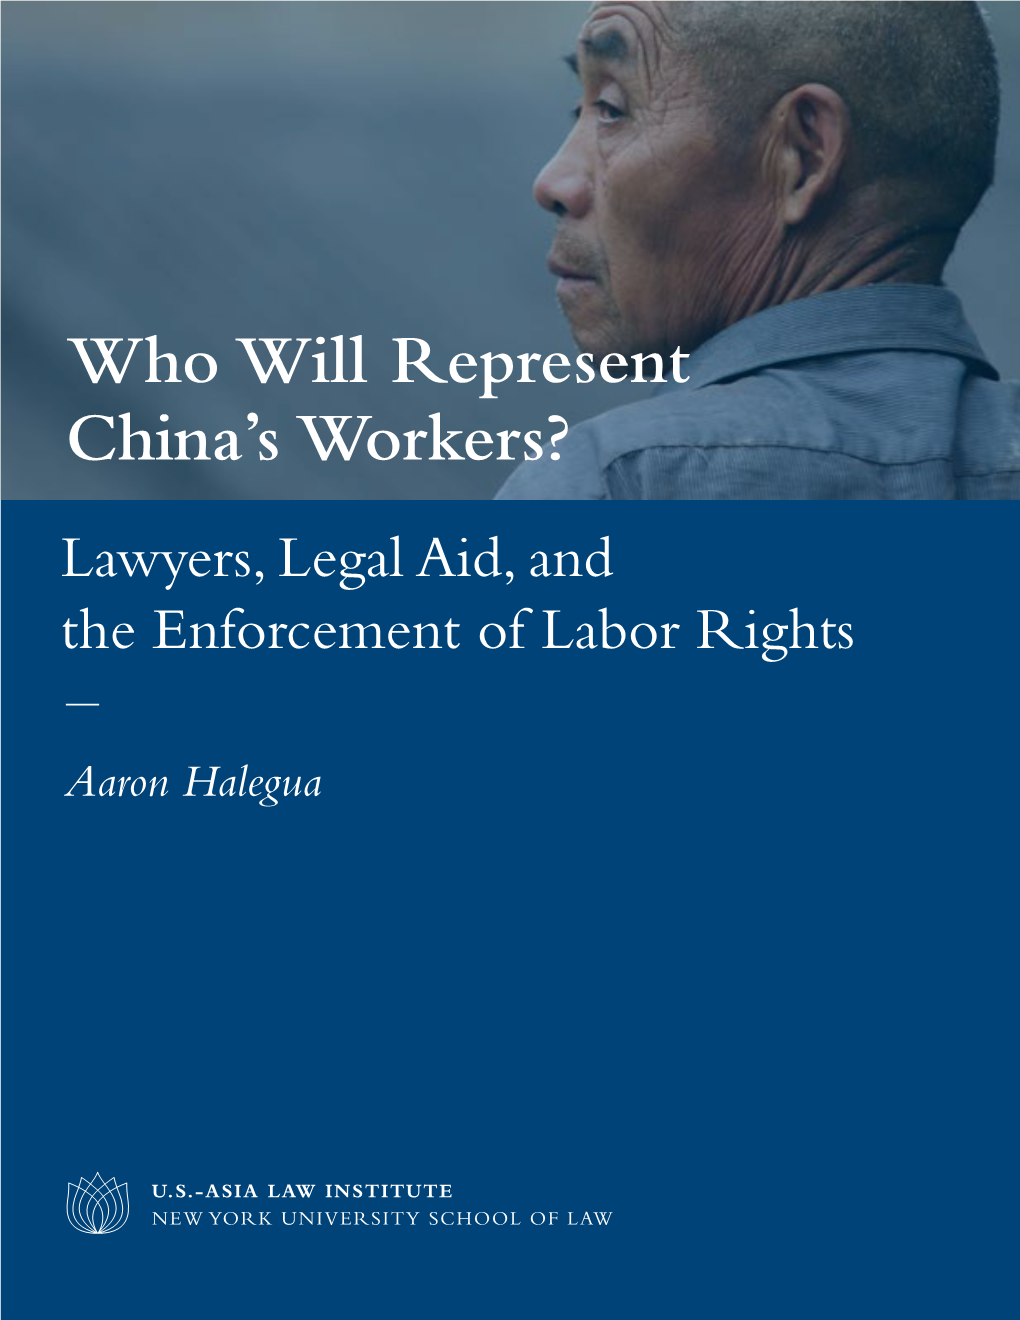 Who Will Represent China's Workers? Lawyers, Legal Aid, and the Enforcement of Labor Rights